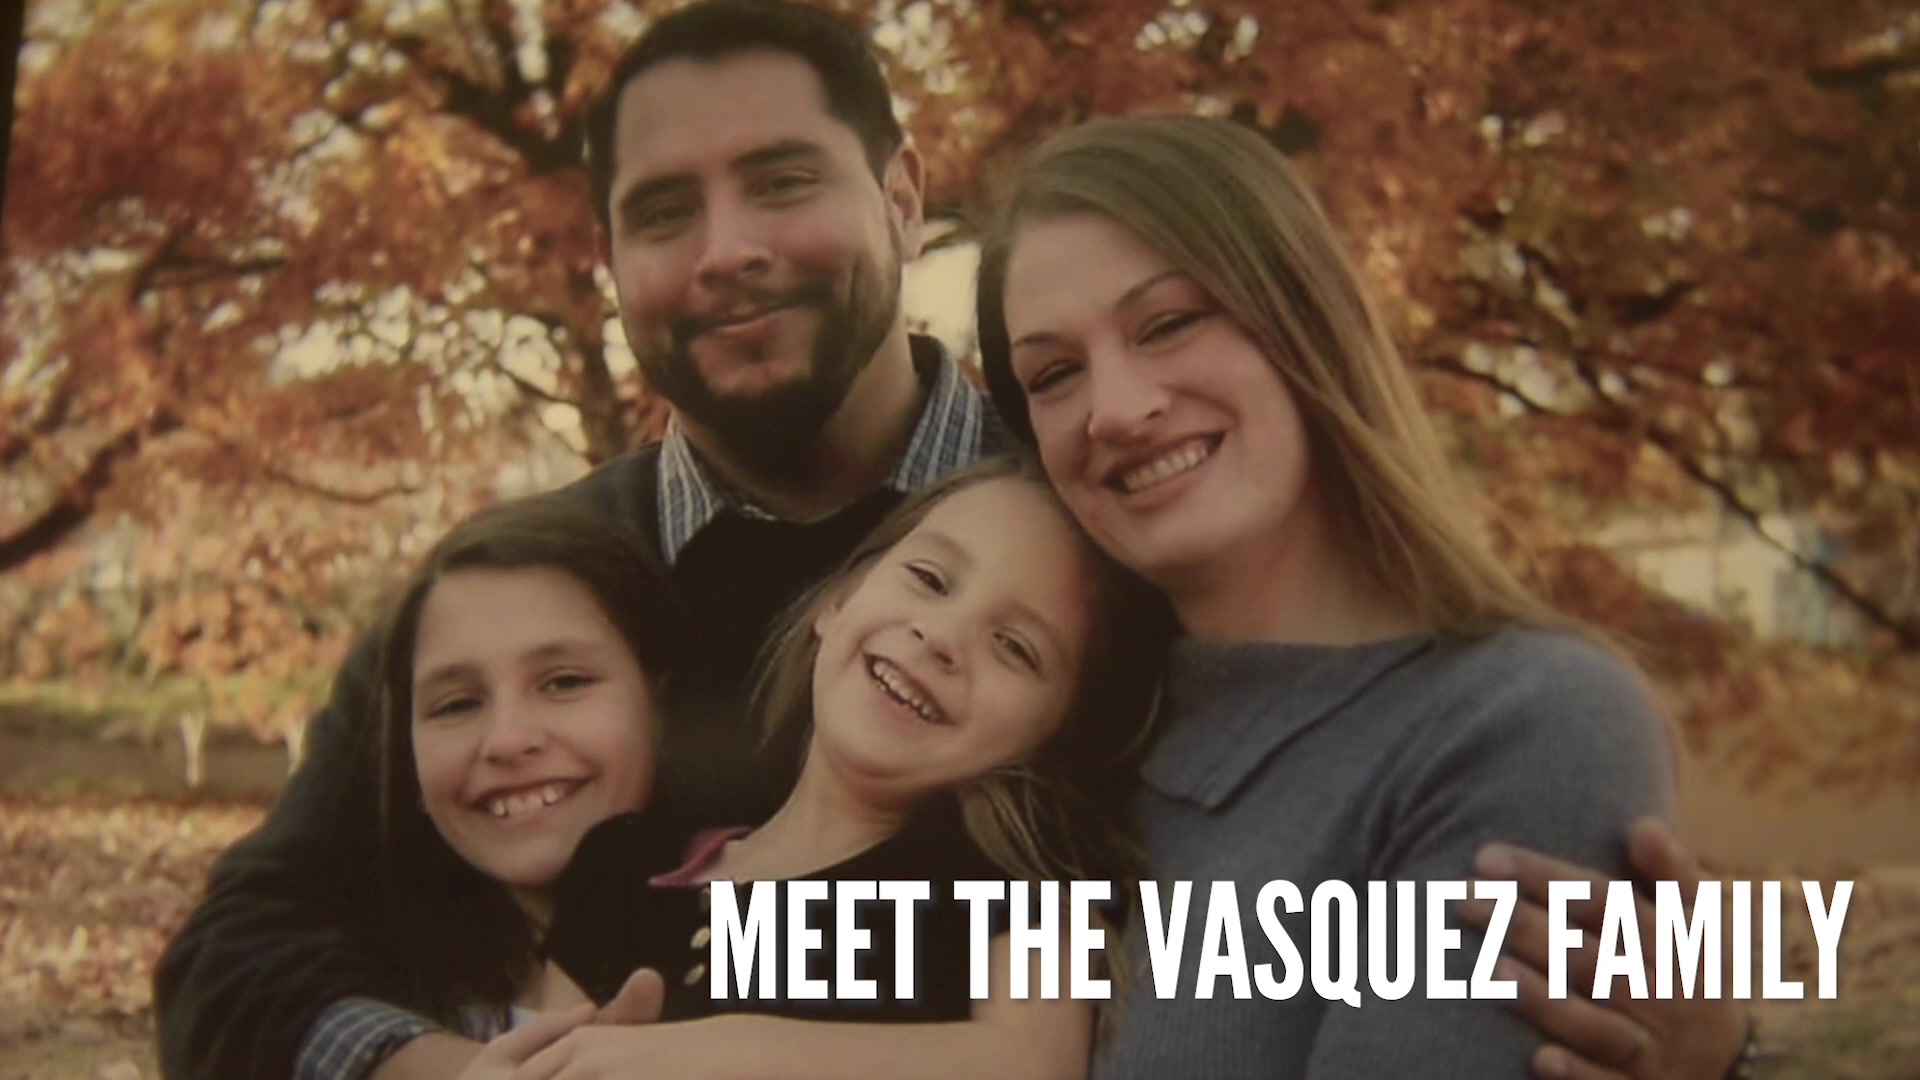 They both served their country as service members. Now, Jennifer Vasquez is still in the Navy and her husband turned in his uniform and boots to be a stay-at-home dad to their two daughters. They talk about passion and sacrifice for this country, and how it has shaped their family.